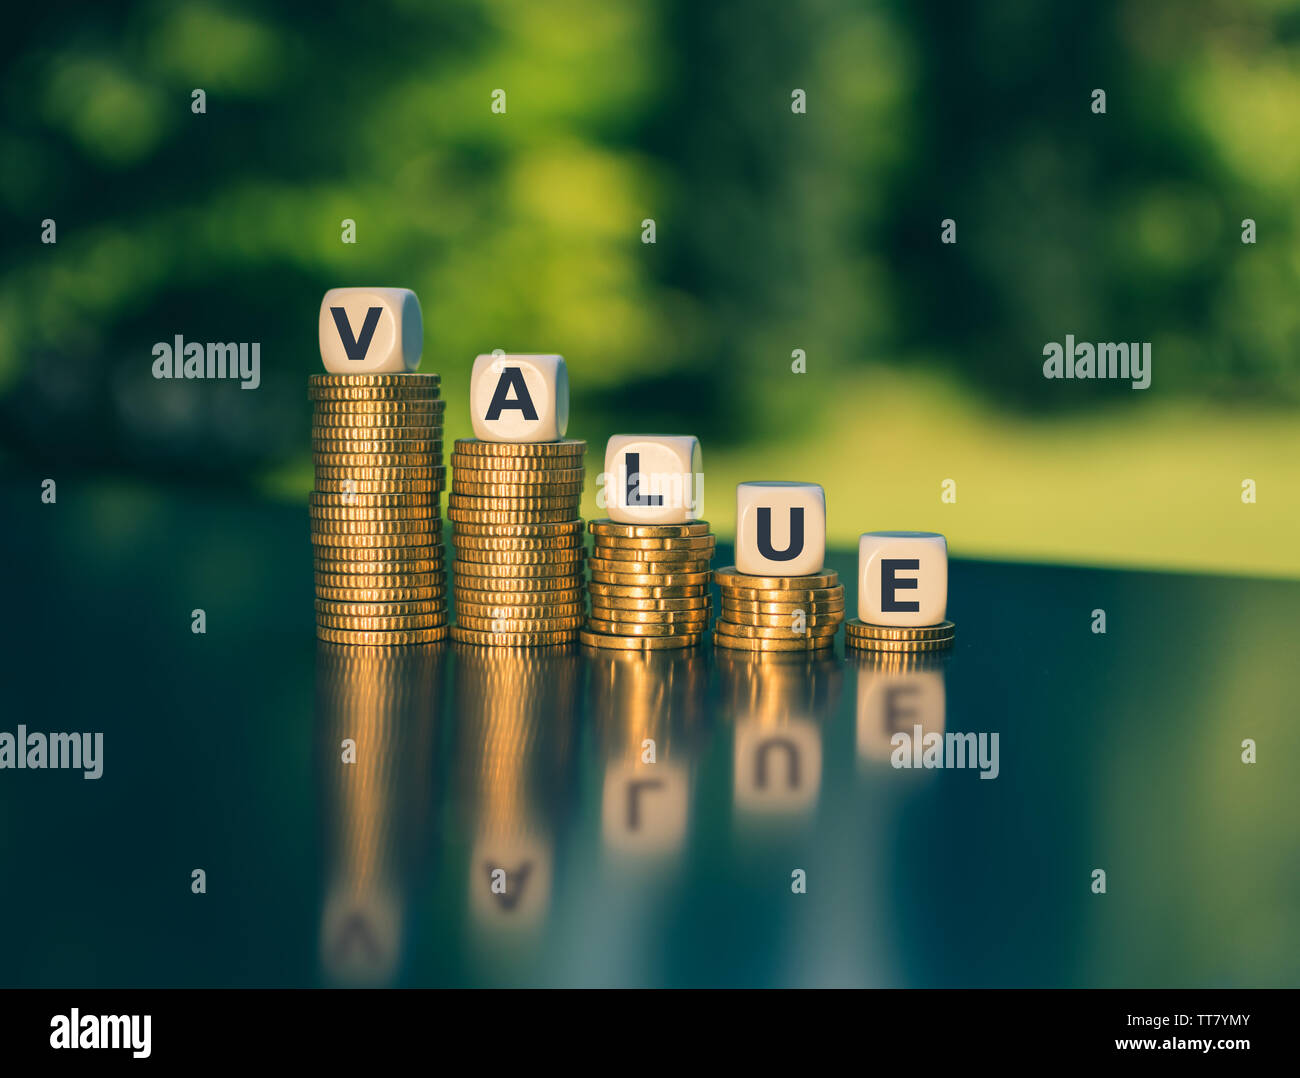 Symbol for decreasing value. Dice form the word 'value' on decreasing stacks of coins. Stock Photo